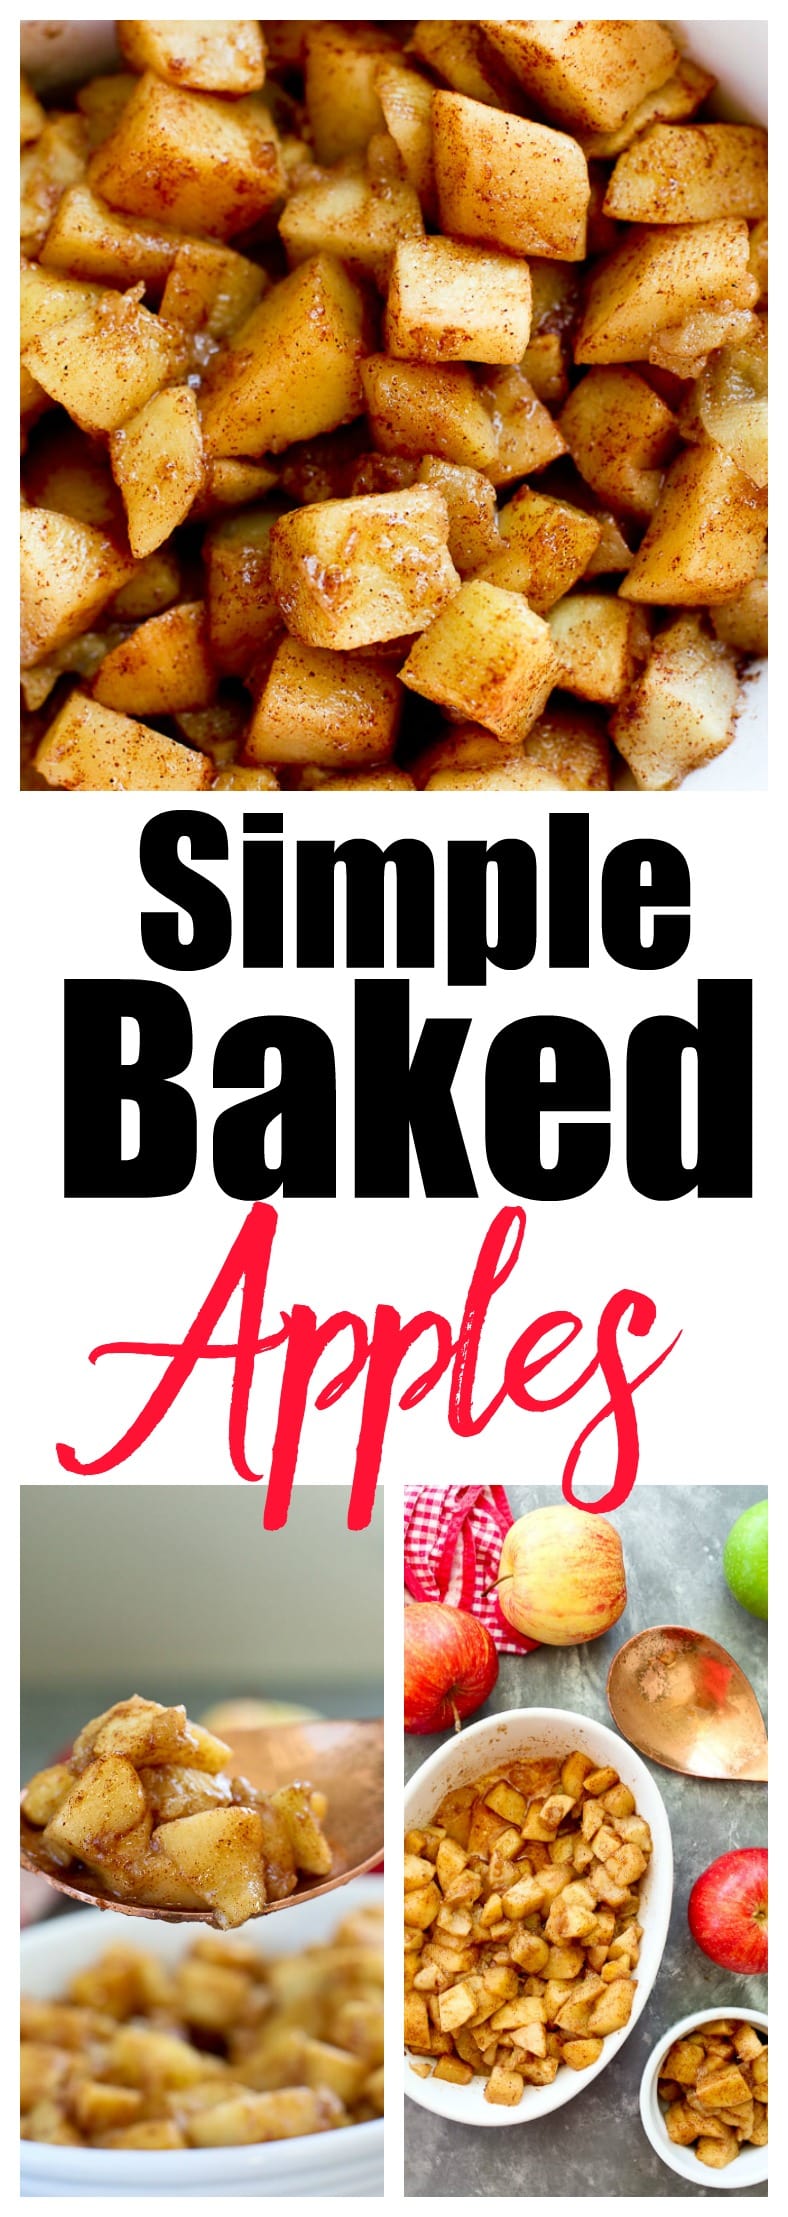 Simple Baked Apples Recipe. Great fall recipe, healthy side dish, super kid-friendly #vegan #gluten-free #kidfood #toddlerfood